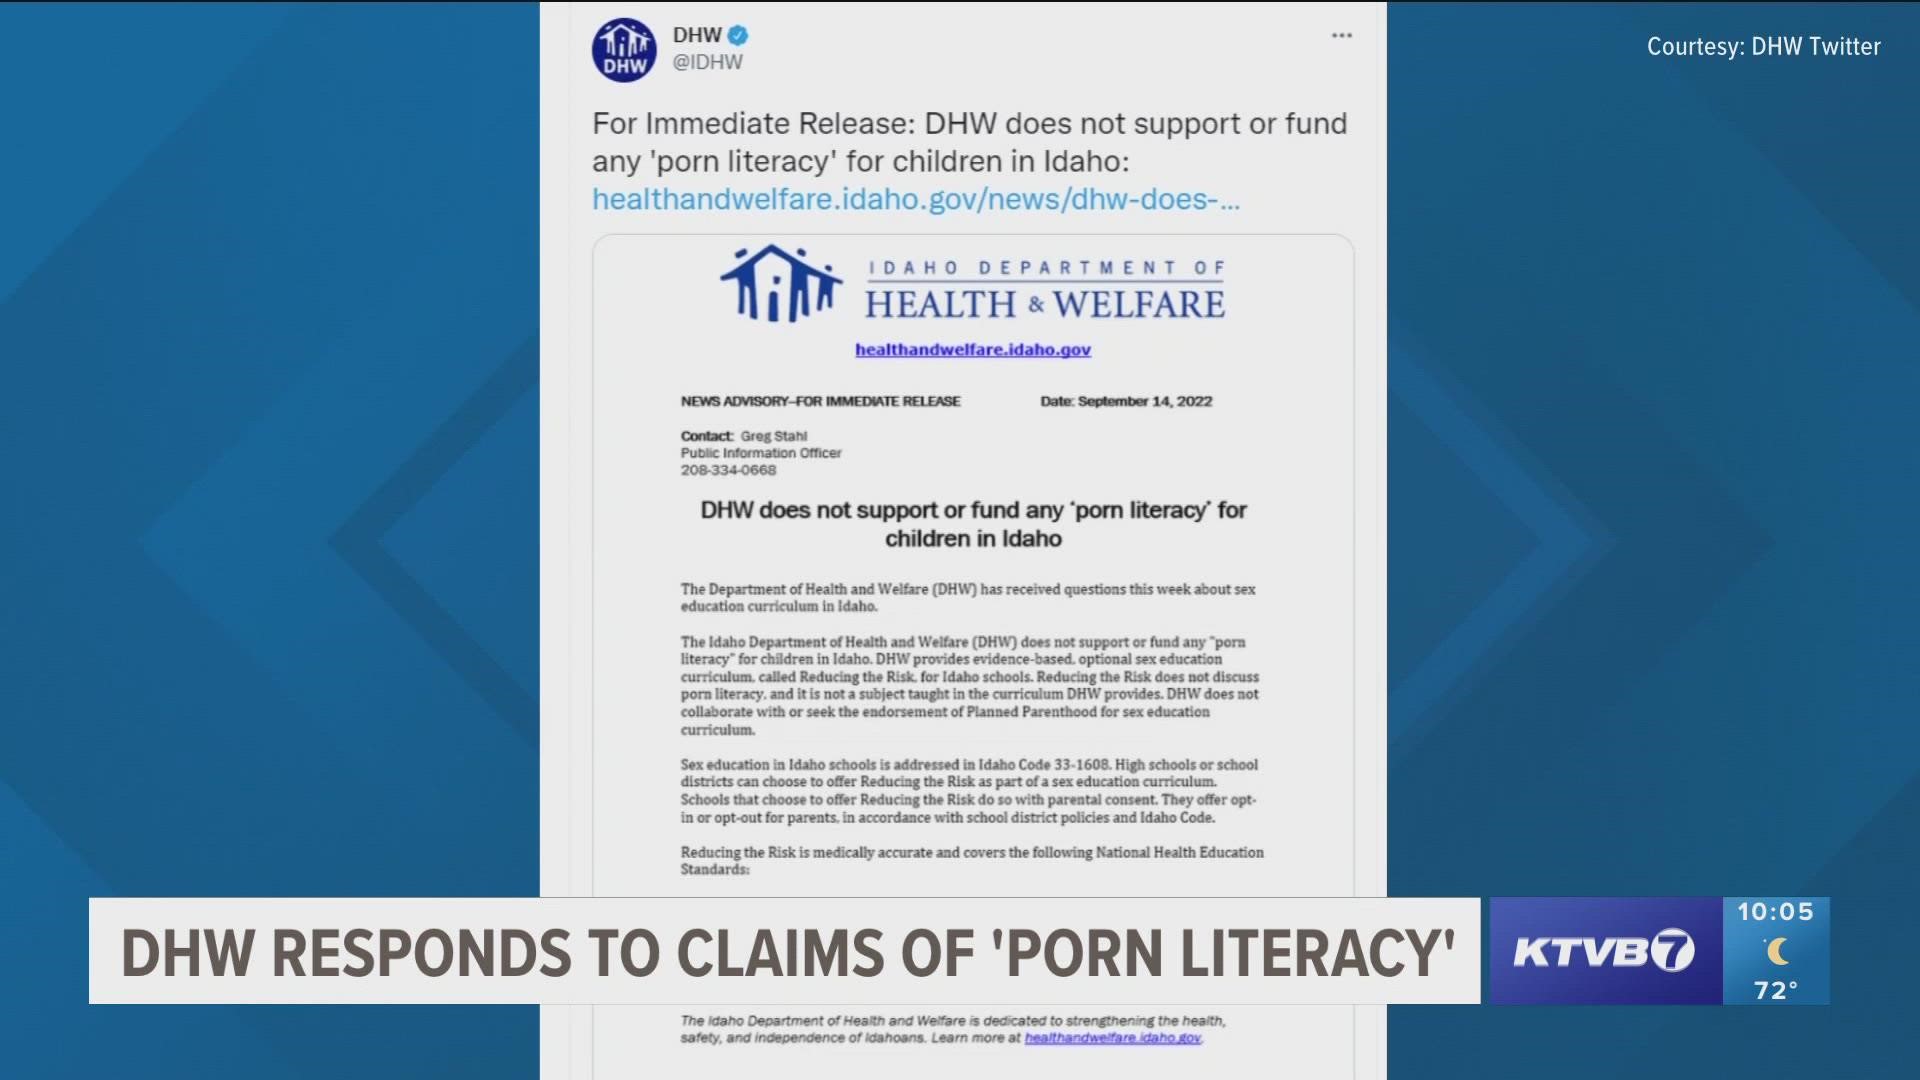 IDHW issued a statement on sex education in schools saying it does not support “porn literacy,” instead provides evidence-based, optional sex education to students.